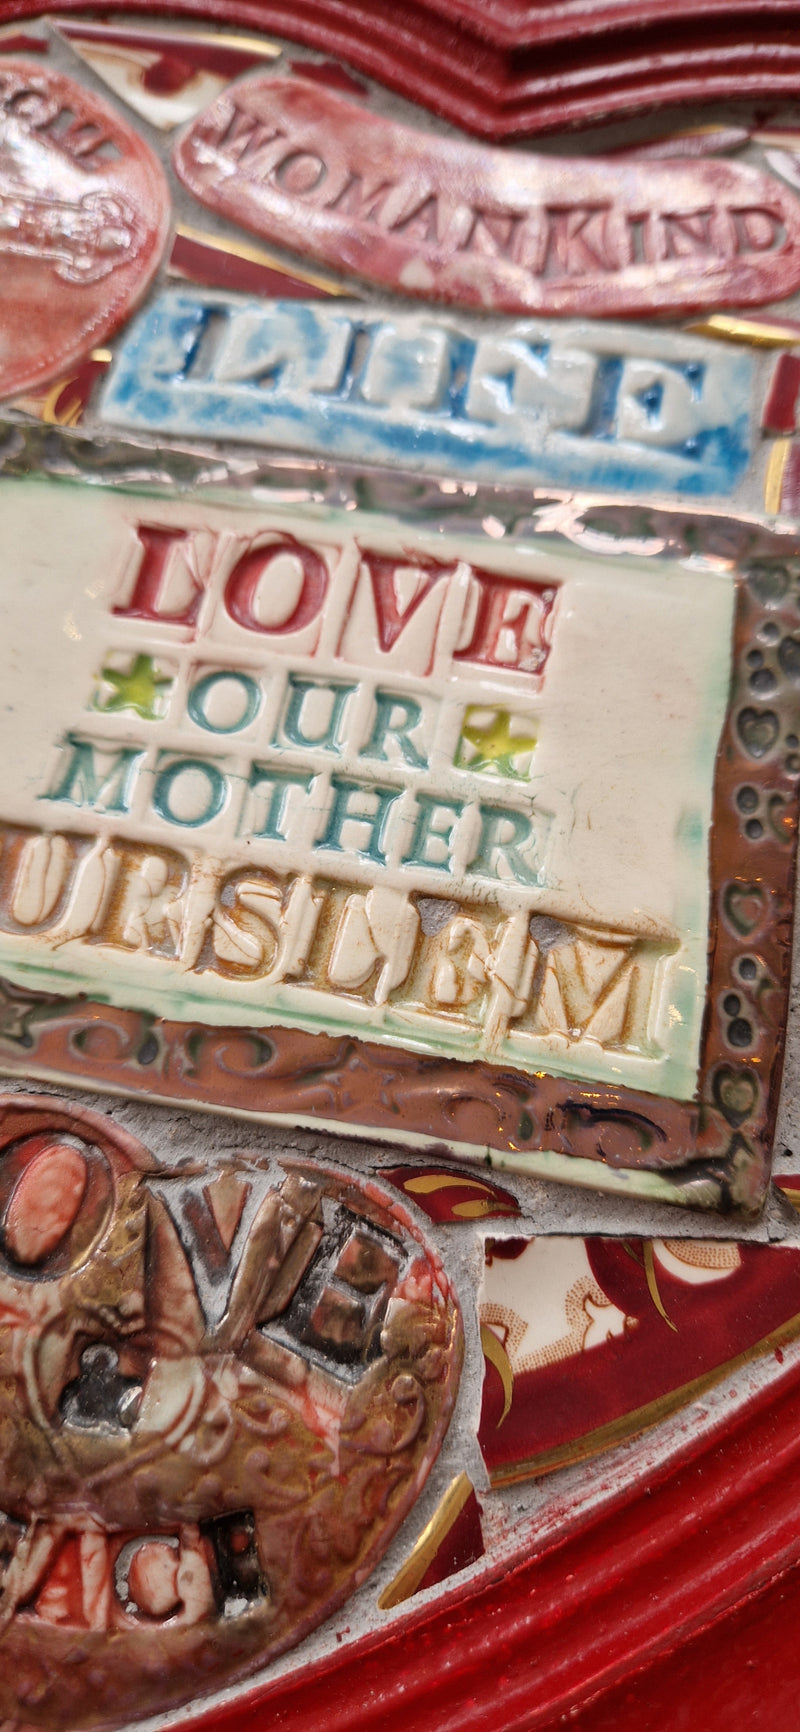 Red Heart Womankind Life Love our Mother Burslem 2021 by Philip Hardaker